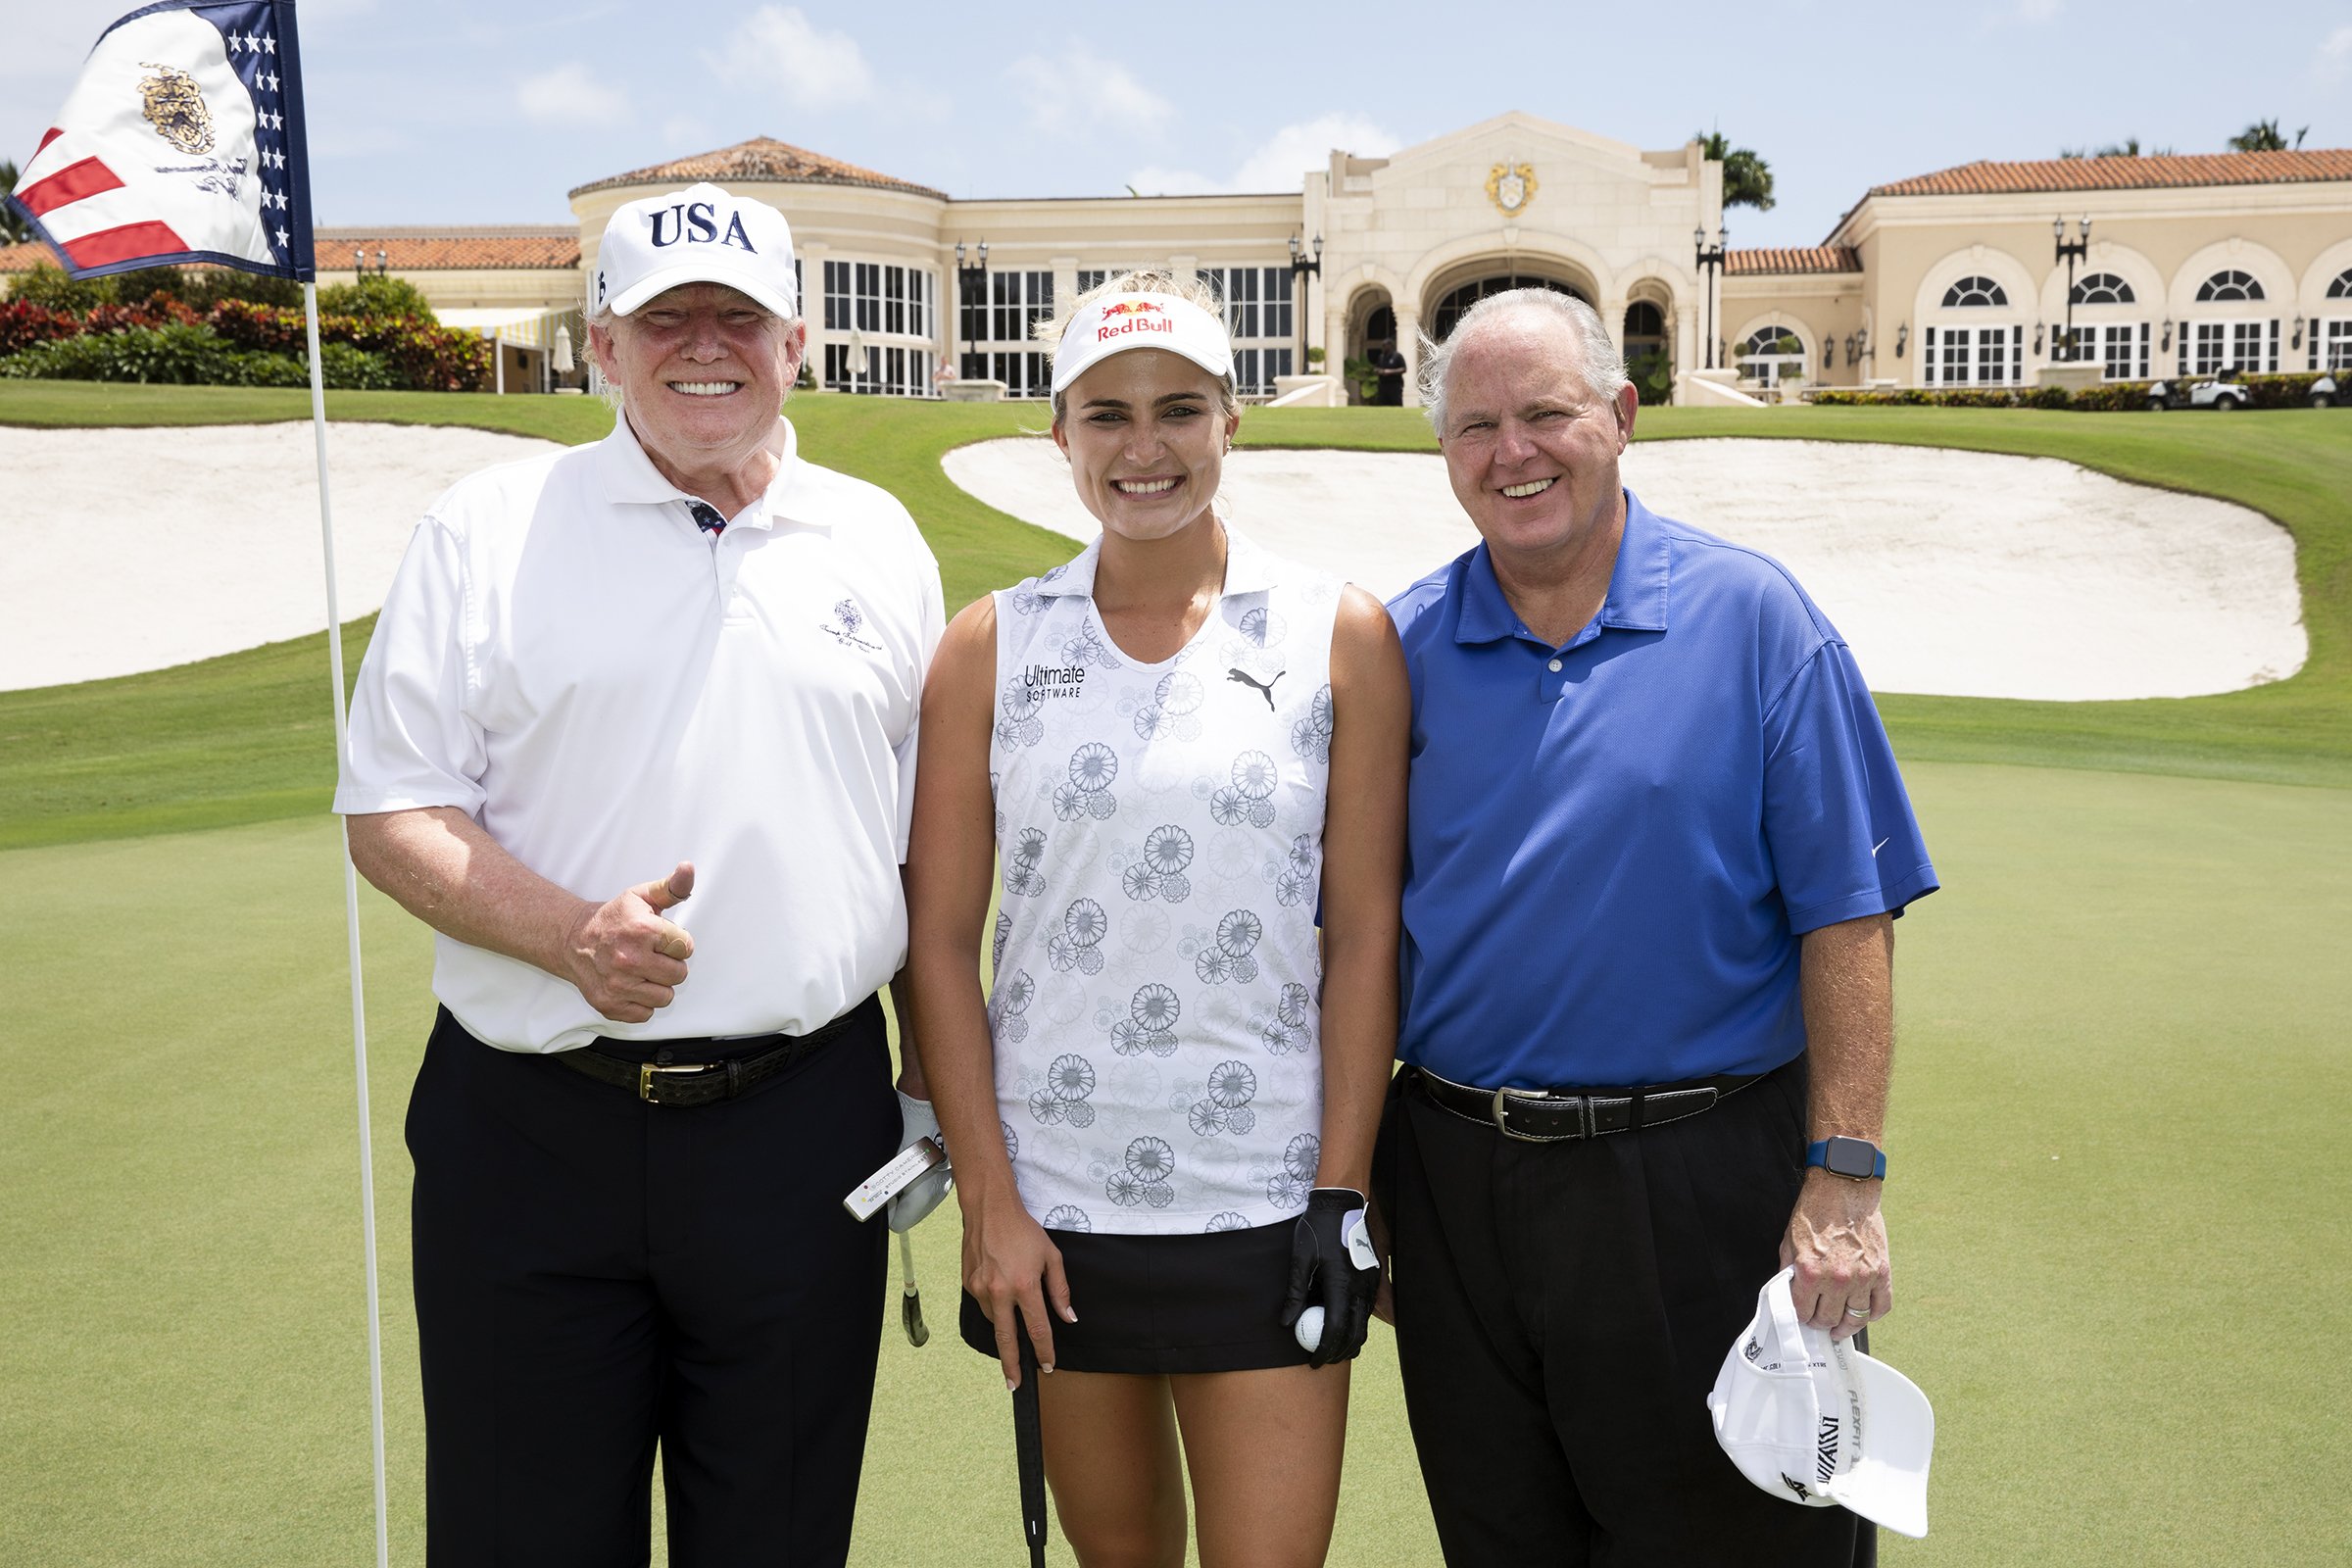 President Donald J. Trump, professional golfer Lexi Thompson and radio commentator Rush Limbaugh pose for a photo Friday, April 19, 2019, at the Trump International Golf Club in West Palm Beach, Florida. | Source: Joyce N. Boghosian by The Trump White House Archived  on Ficker (Public Domain) 